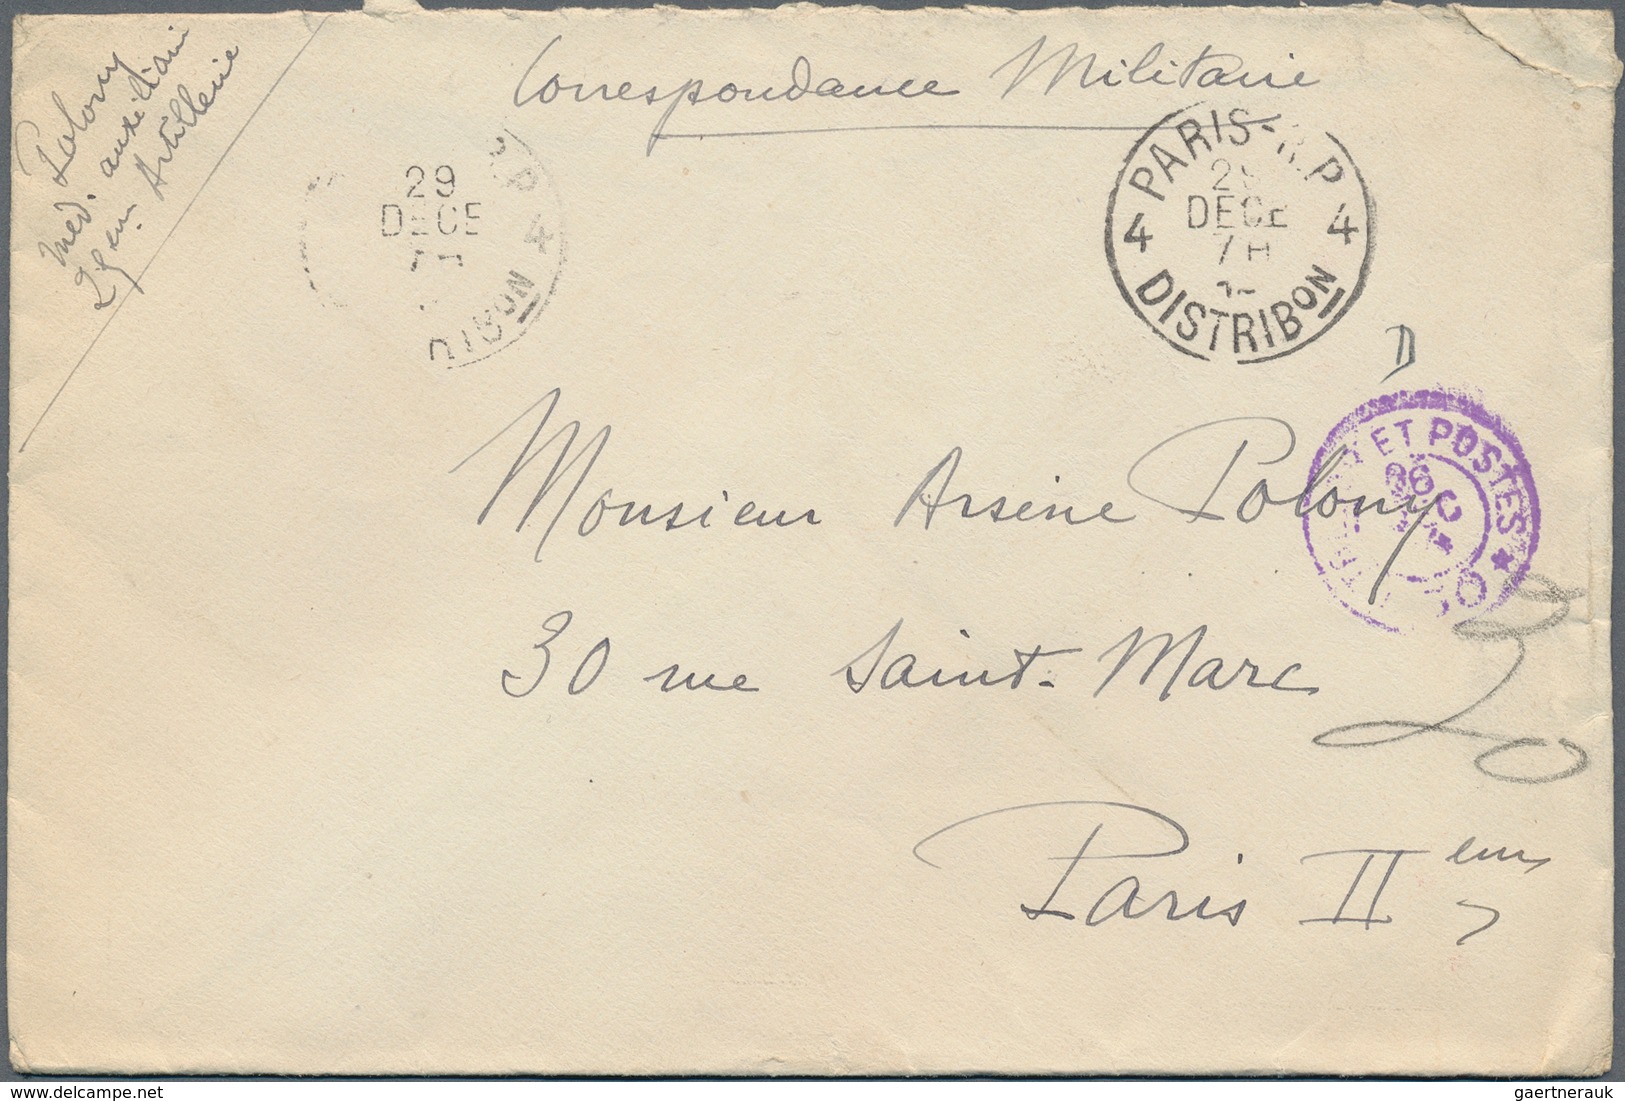 Frankreich: 1914/1921, holding of apprx. 2000+ field post covers/fronts + related, showing a vast ra